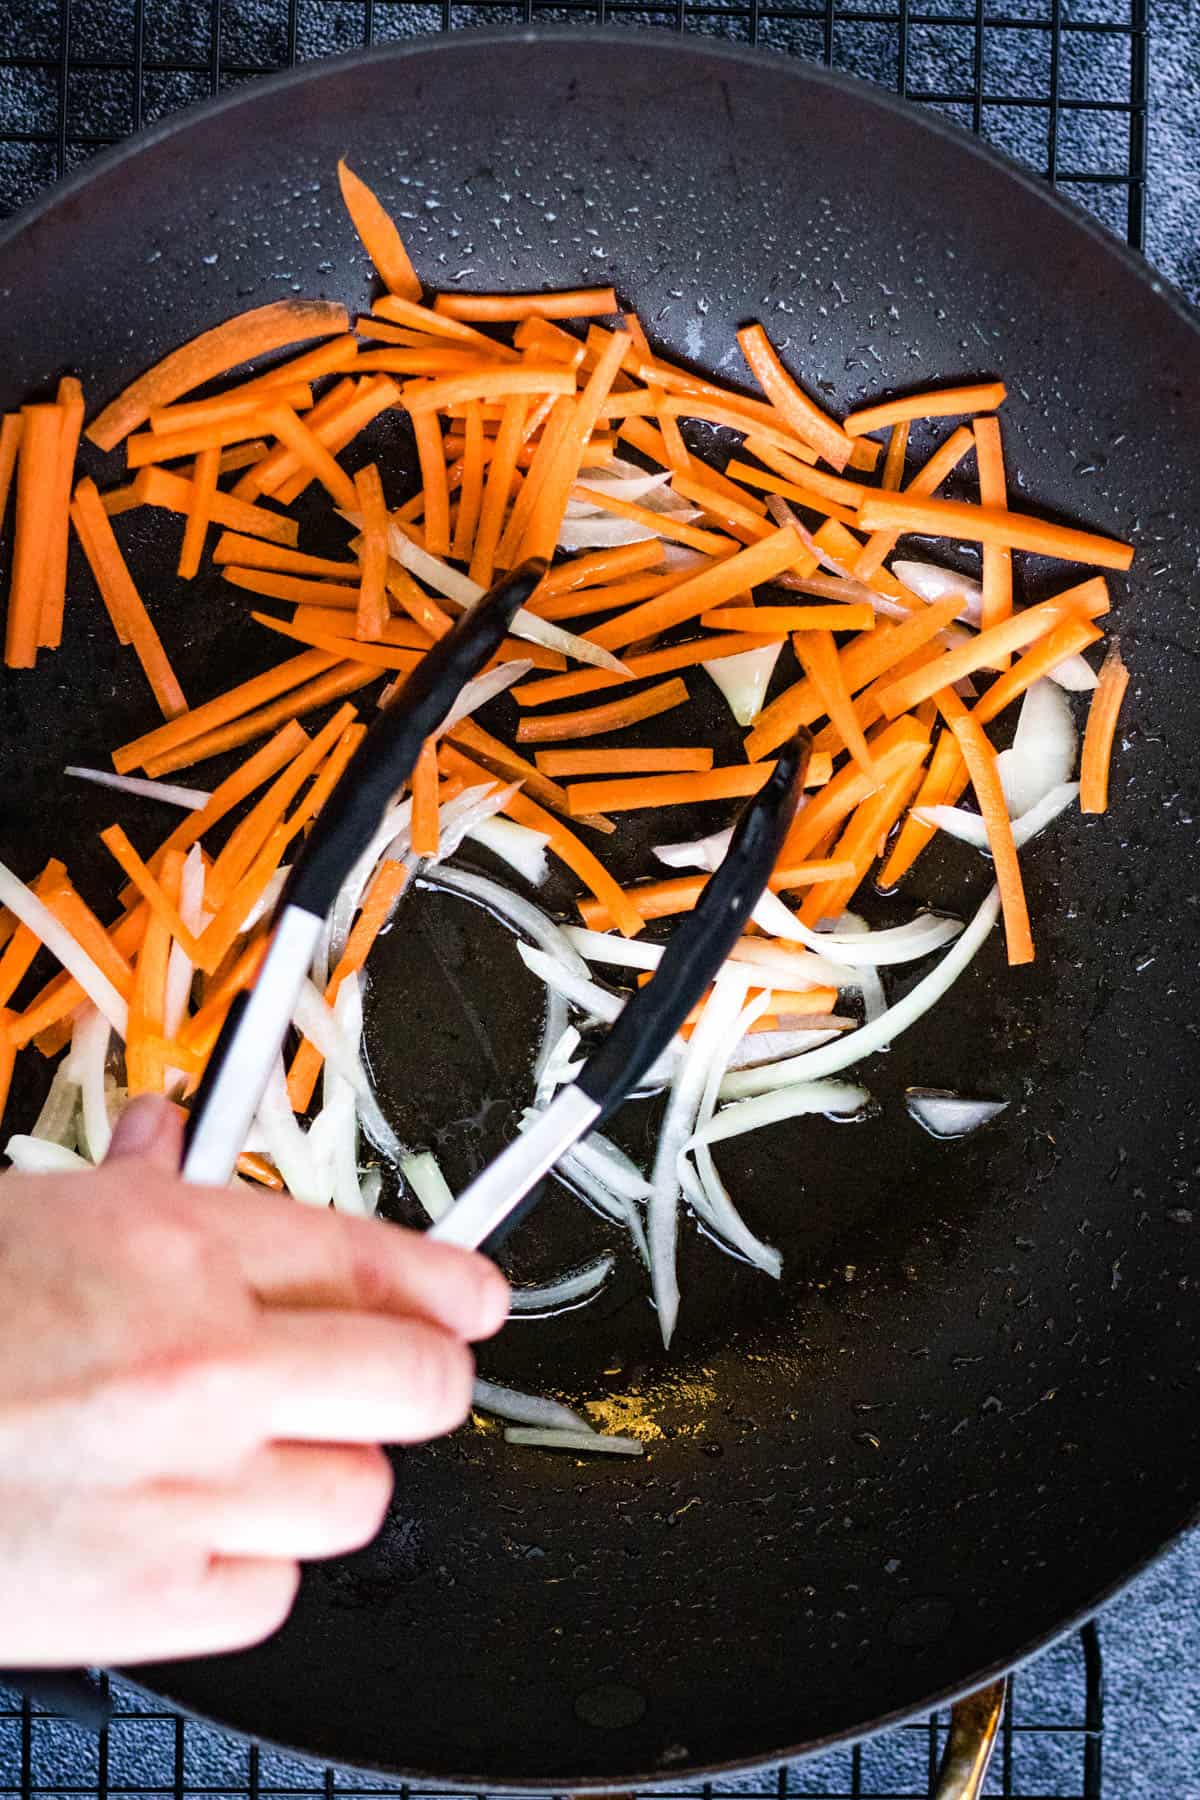 A person preparing beef yakisoba by slicing carrots in a wok.